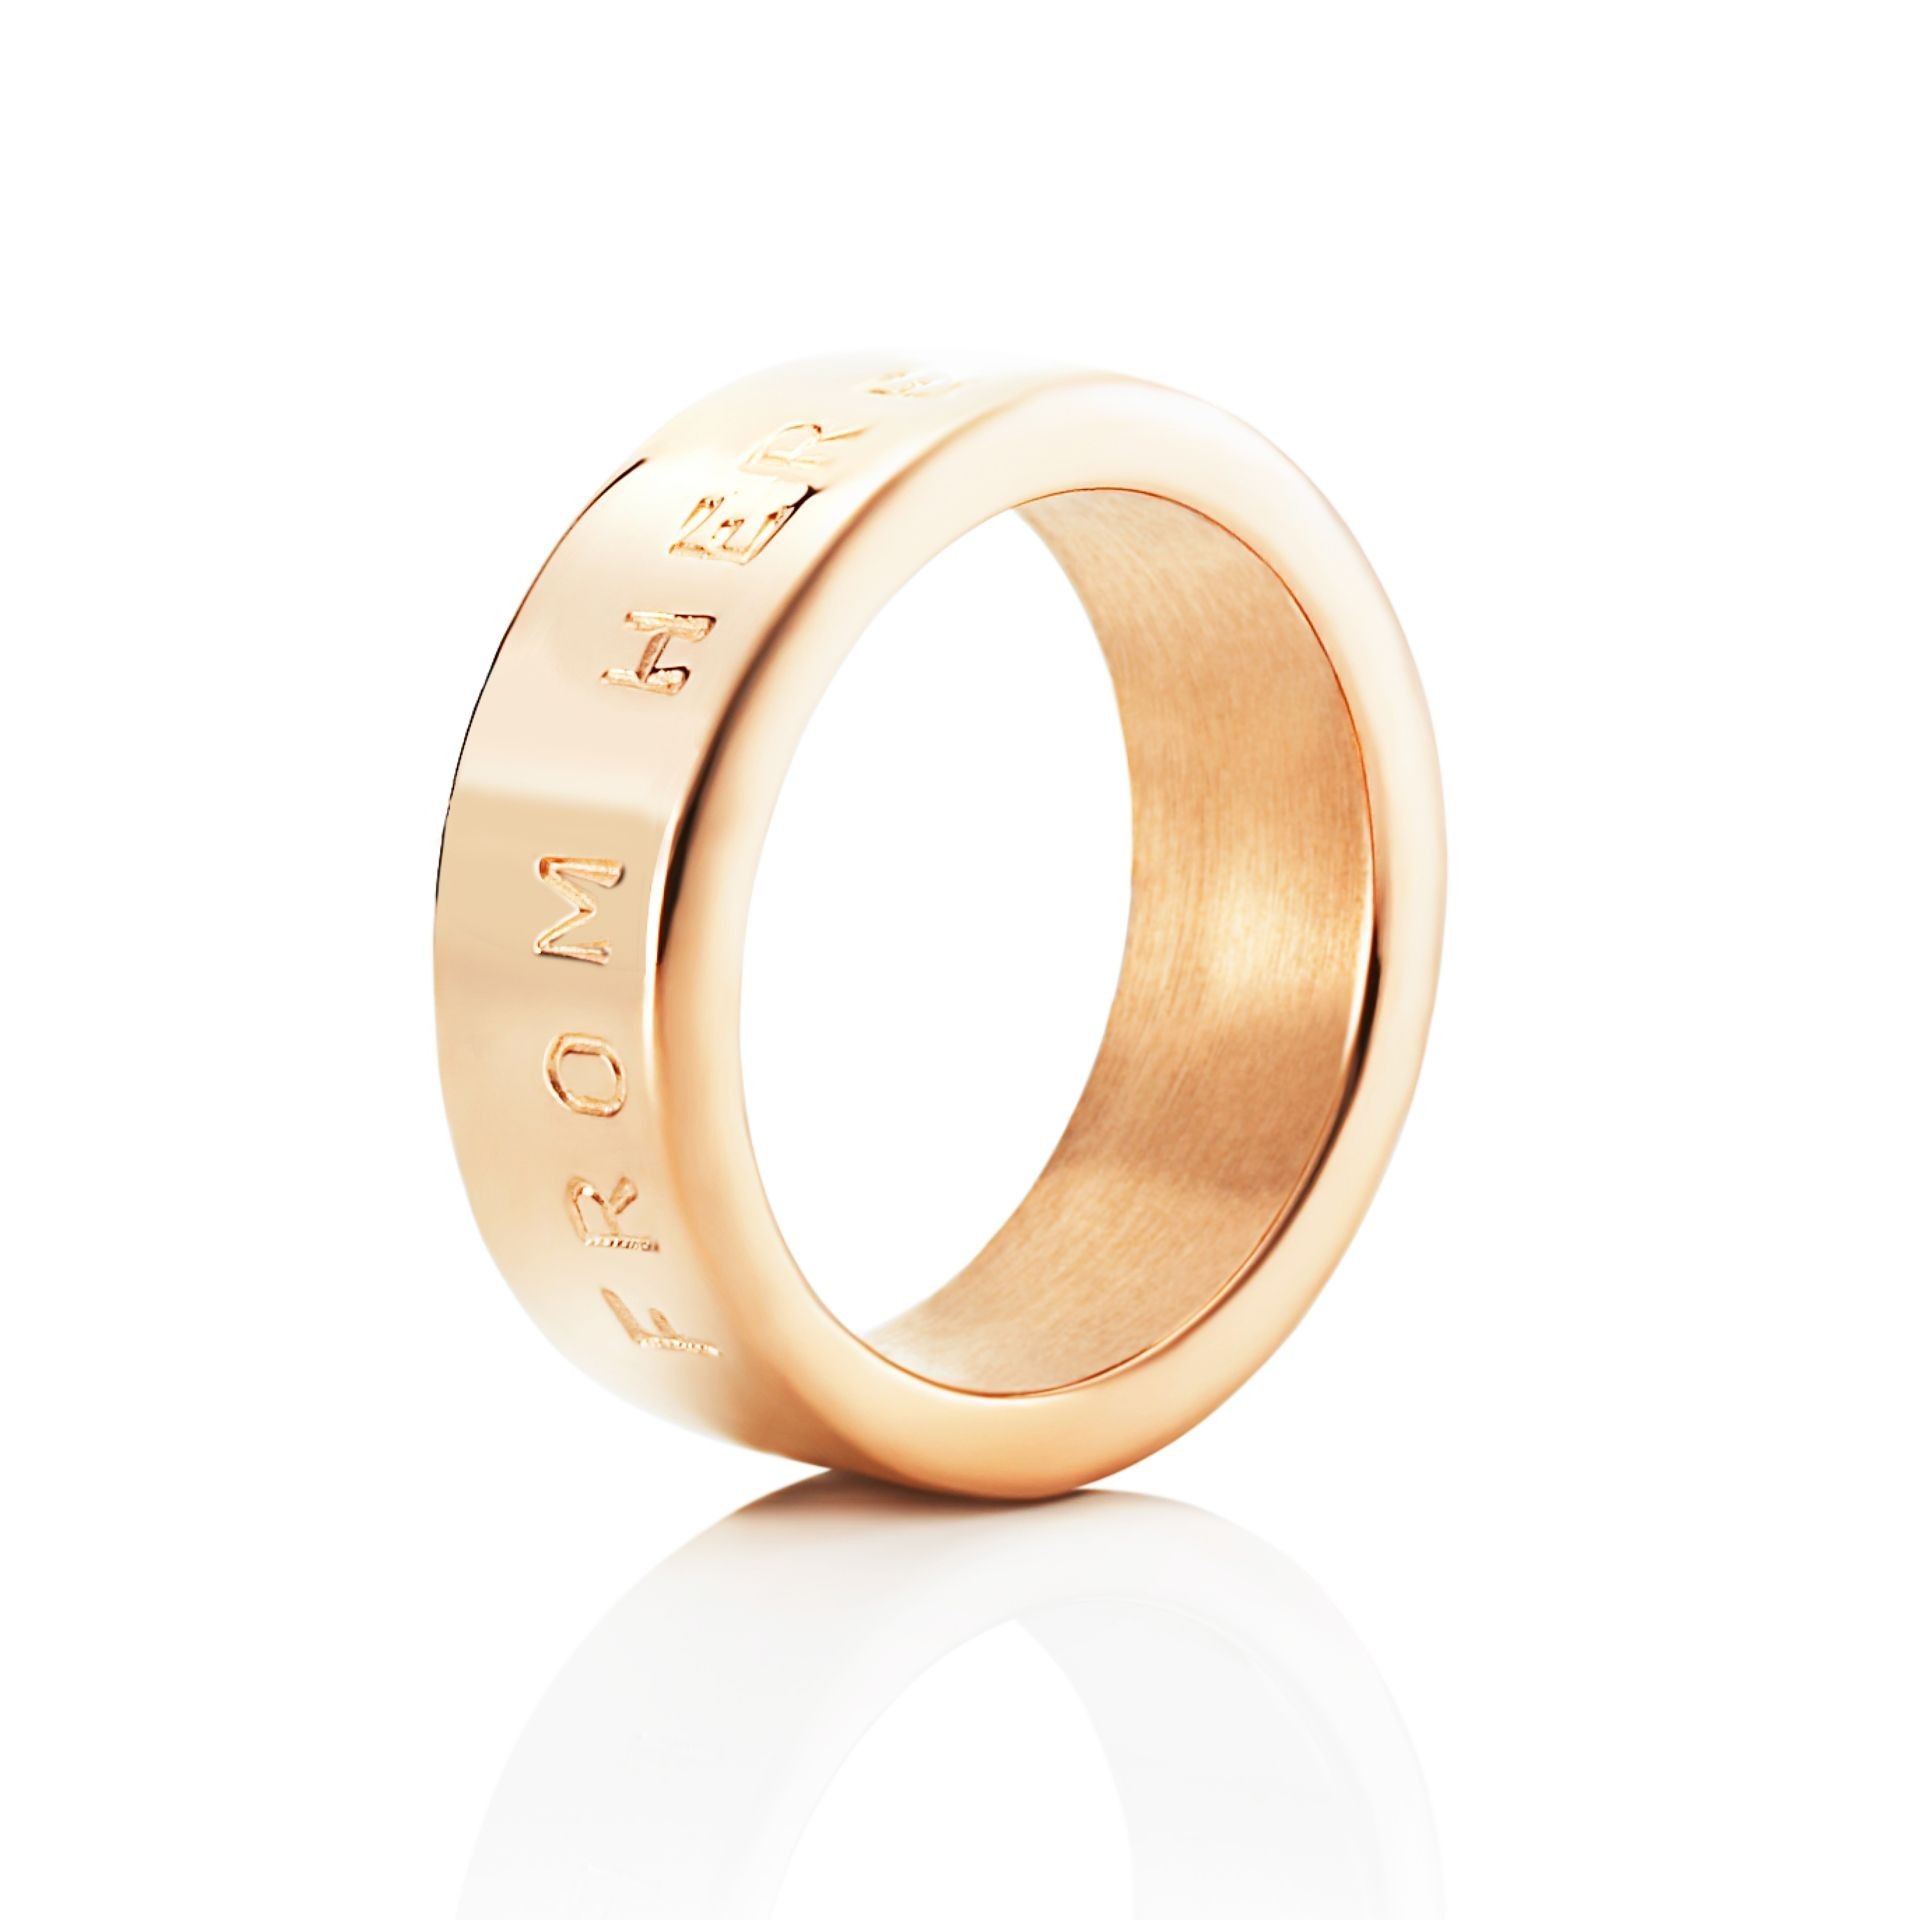 Efva Attling From Here To Eternity Stamped Ring 20.25 MM - GULD